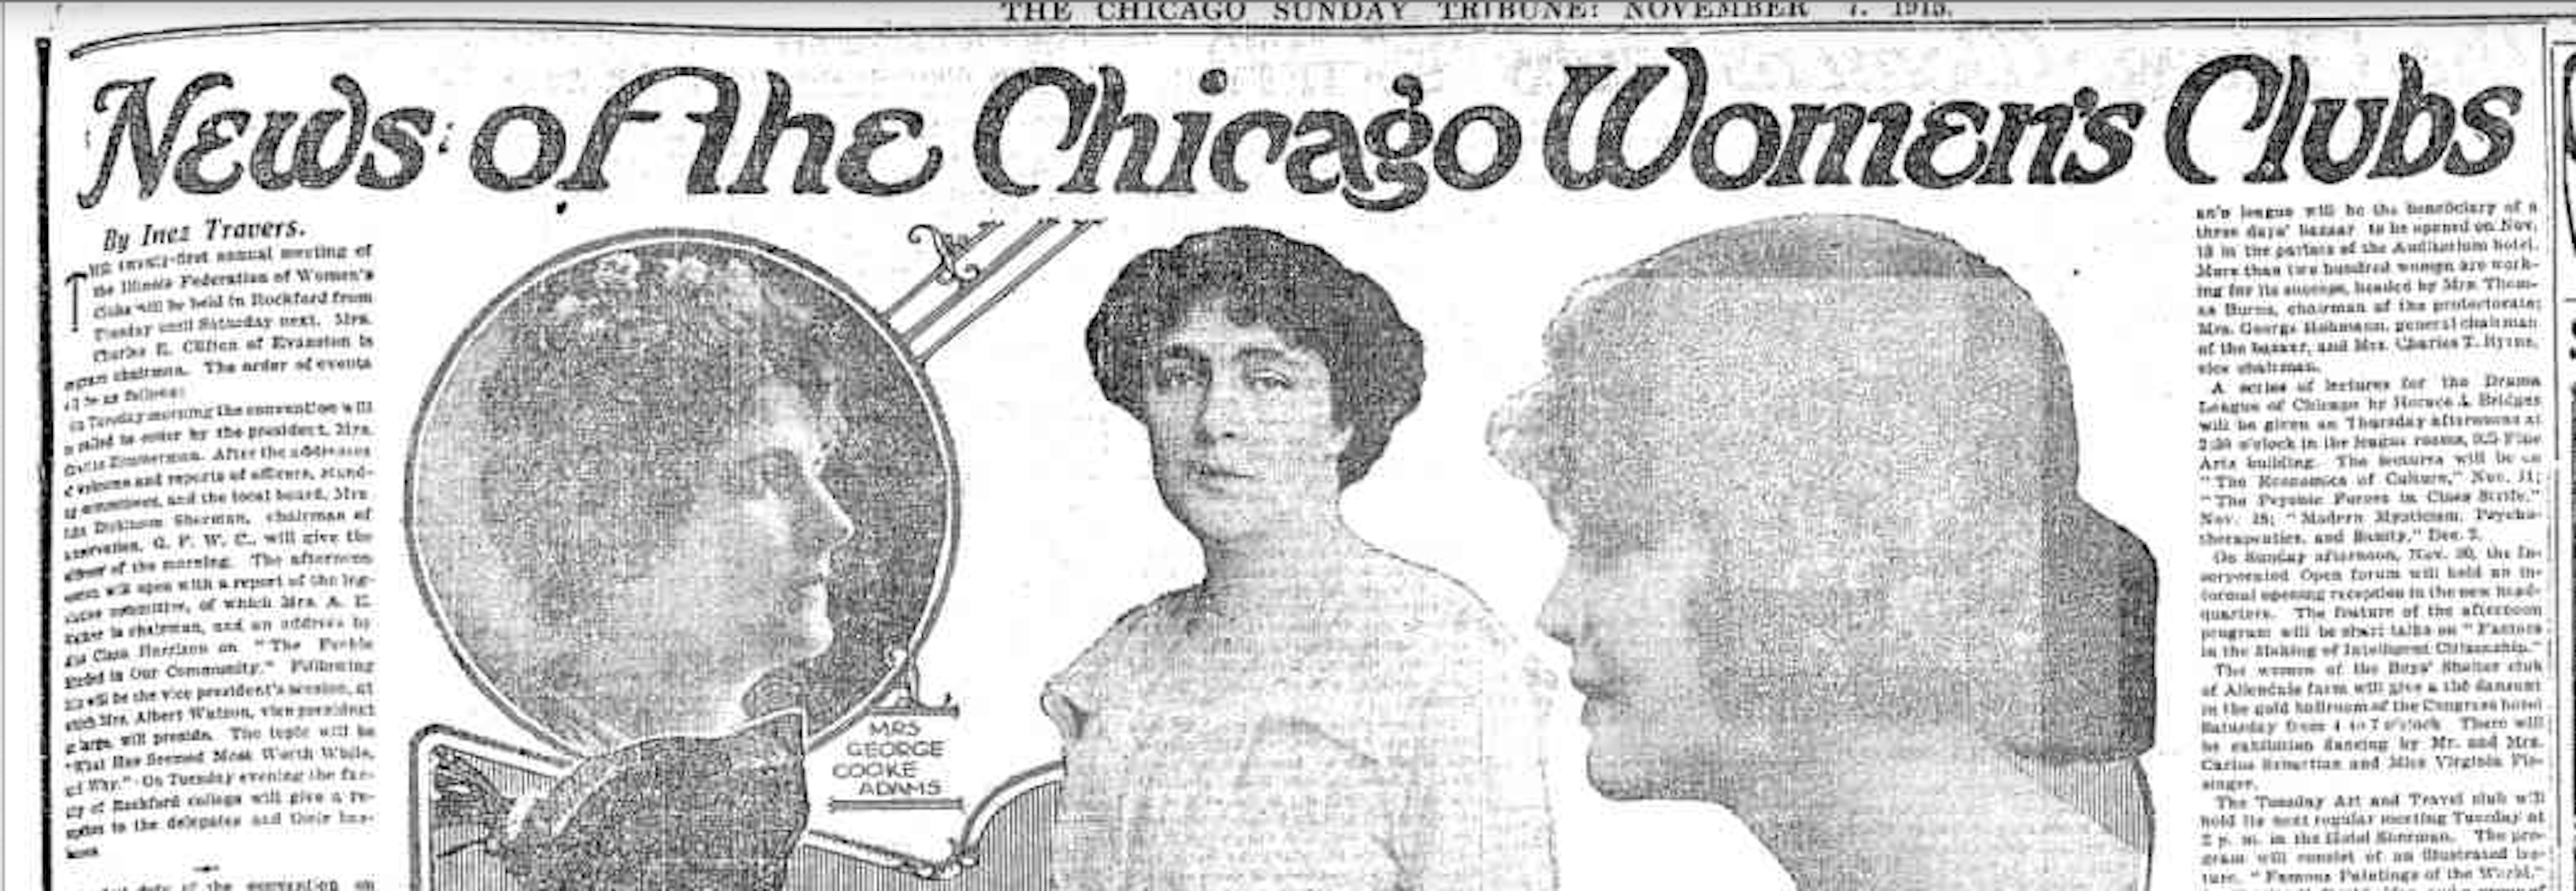 Inez Travers' 'News of the Chicago Women's Clubs' column regularly spanned seven of the newspaper's eight columns. Chicago Tribune, November 7, 1915.